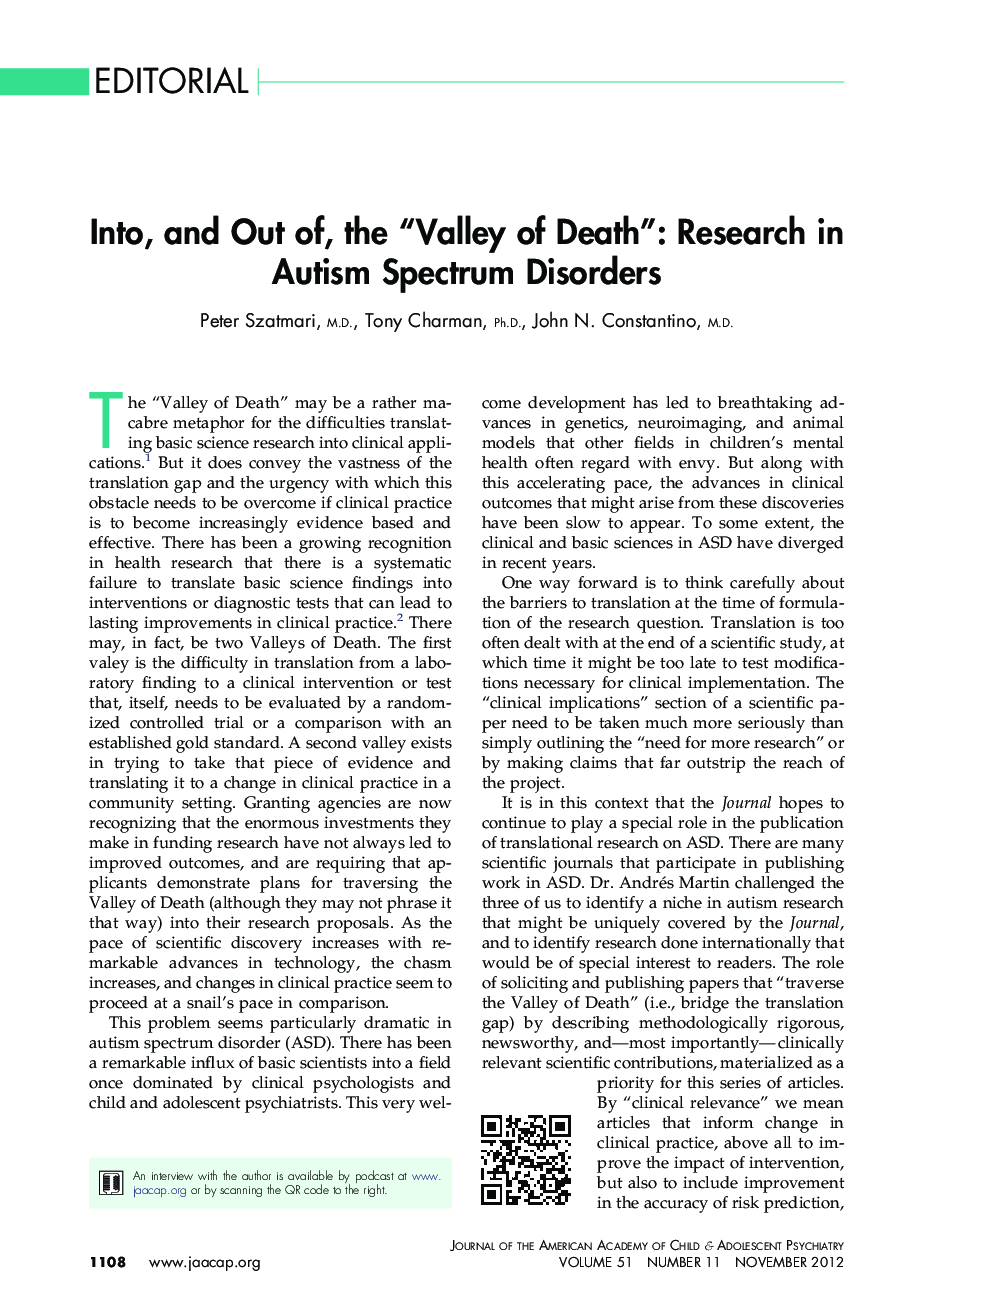 Into, and Out of, the “Valley of Death”: Research in Autism Spectrum Disorders